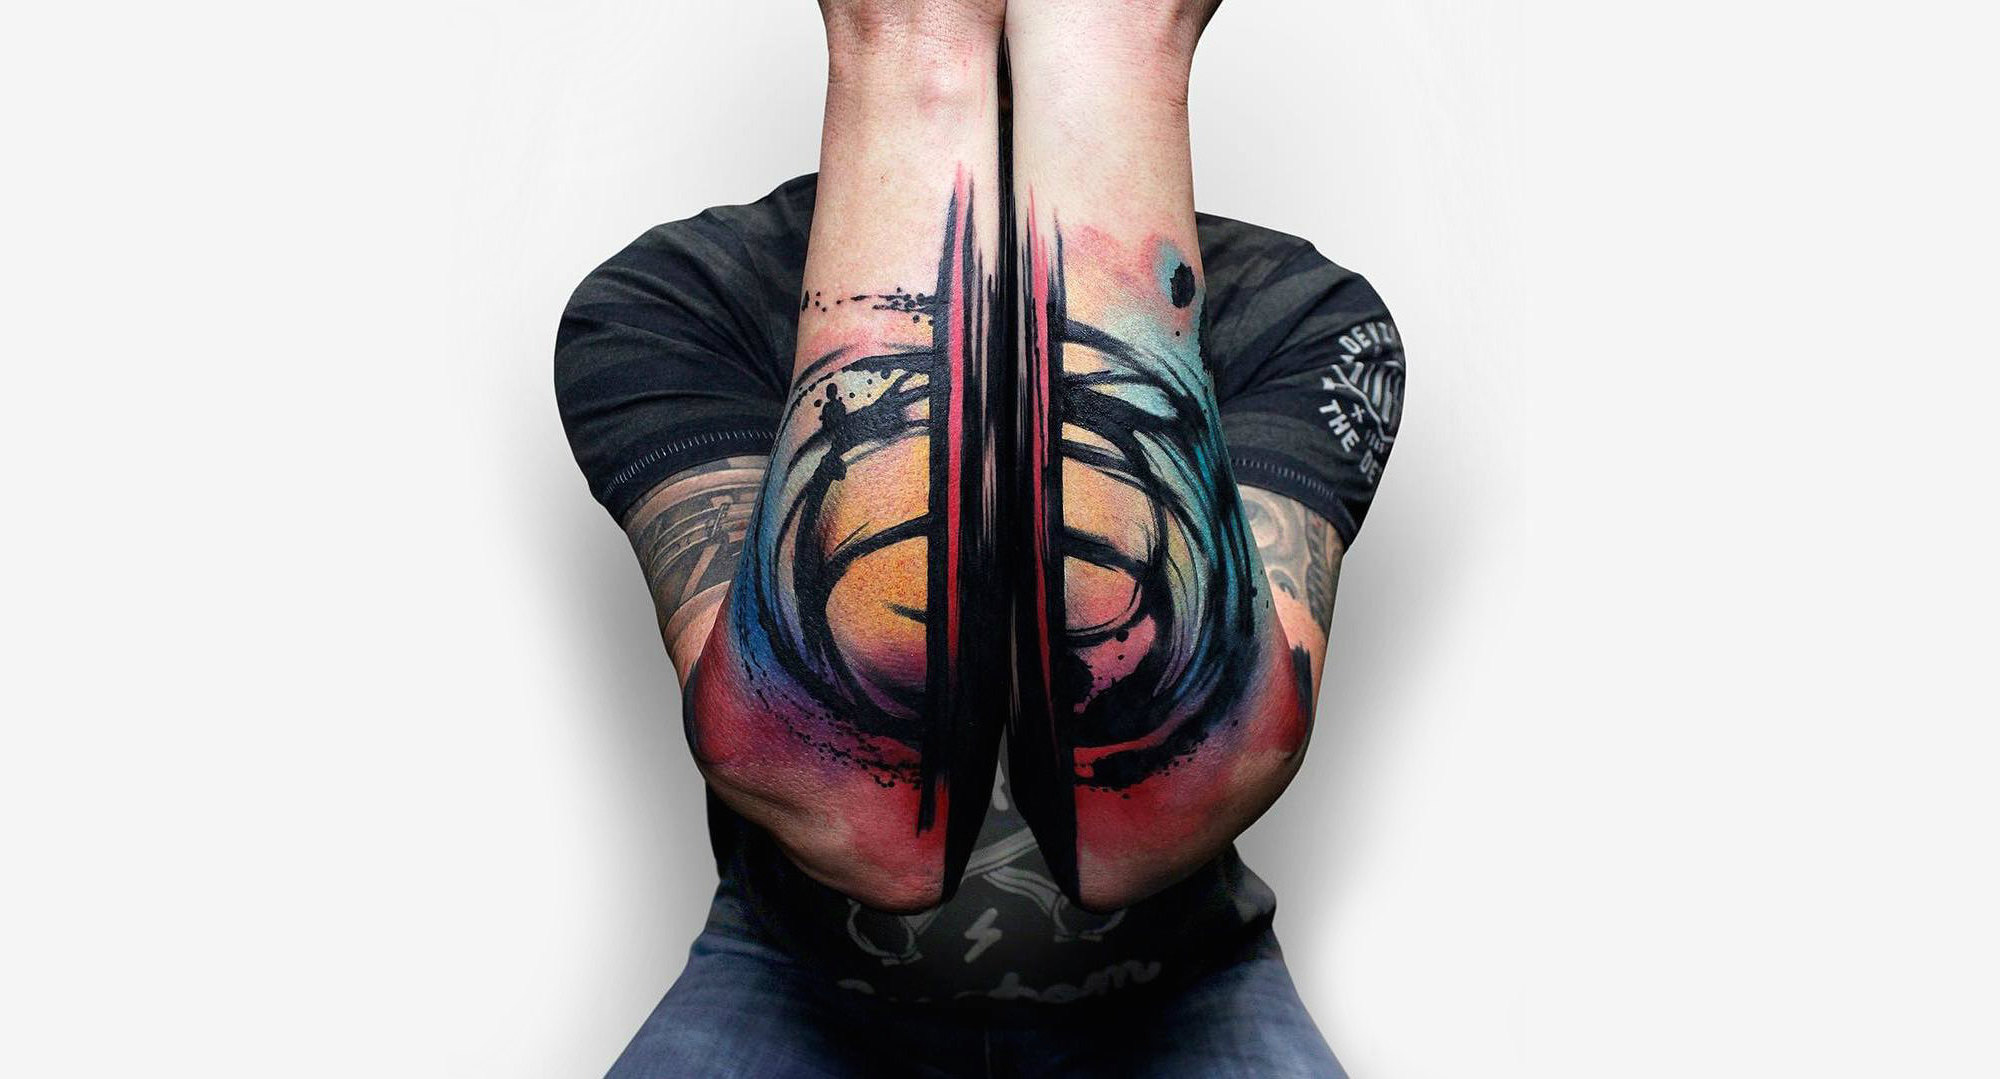 Double forearm watercolor tattoos by Szymgo